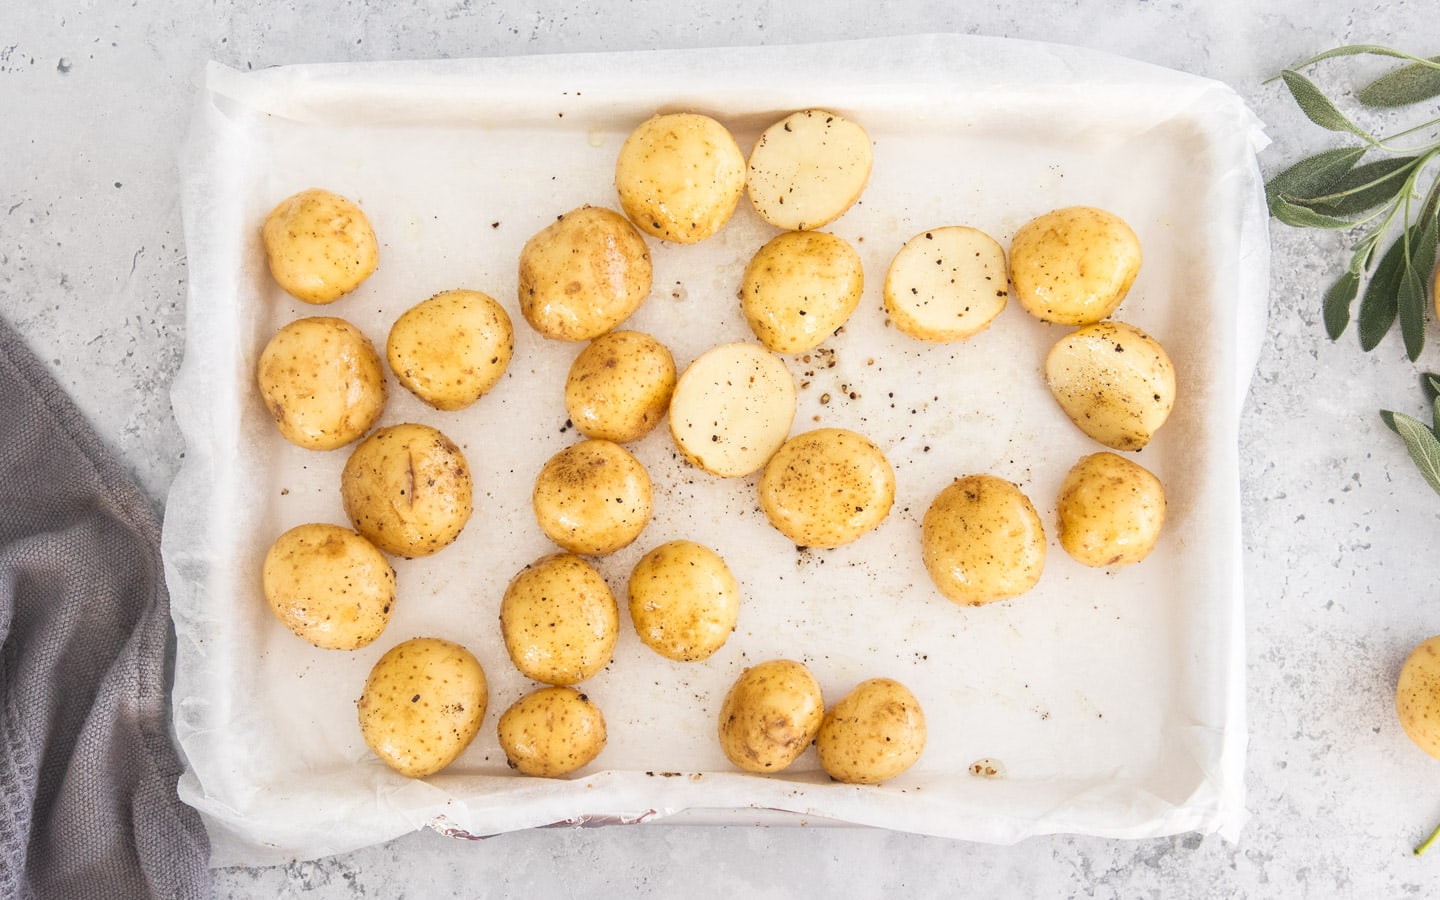 Baby potatoes seasoned with salt and pepper on a baking tray.